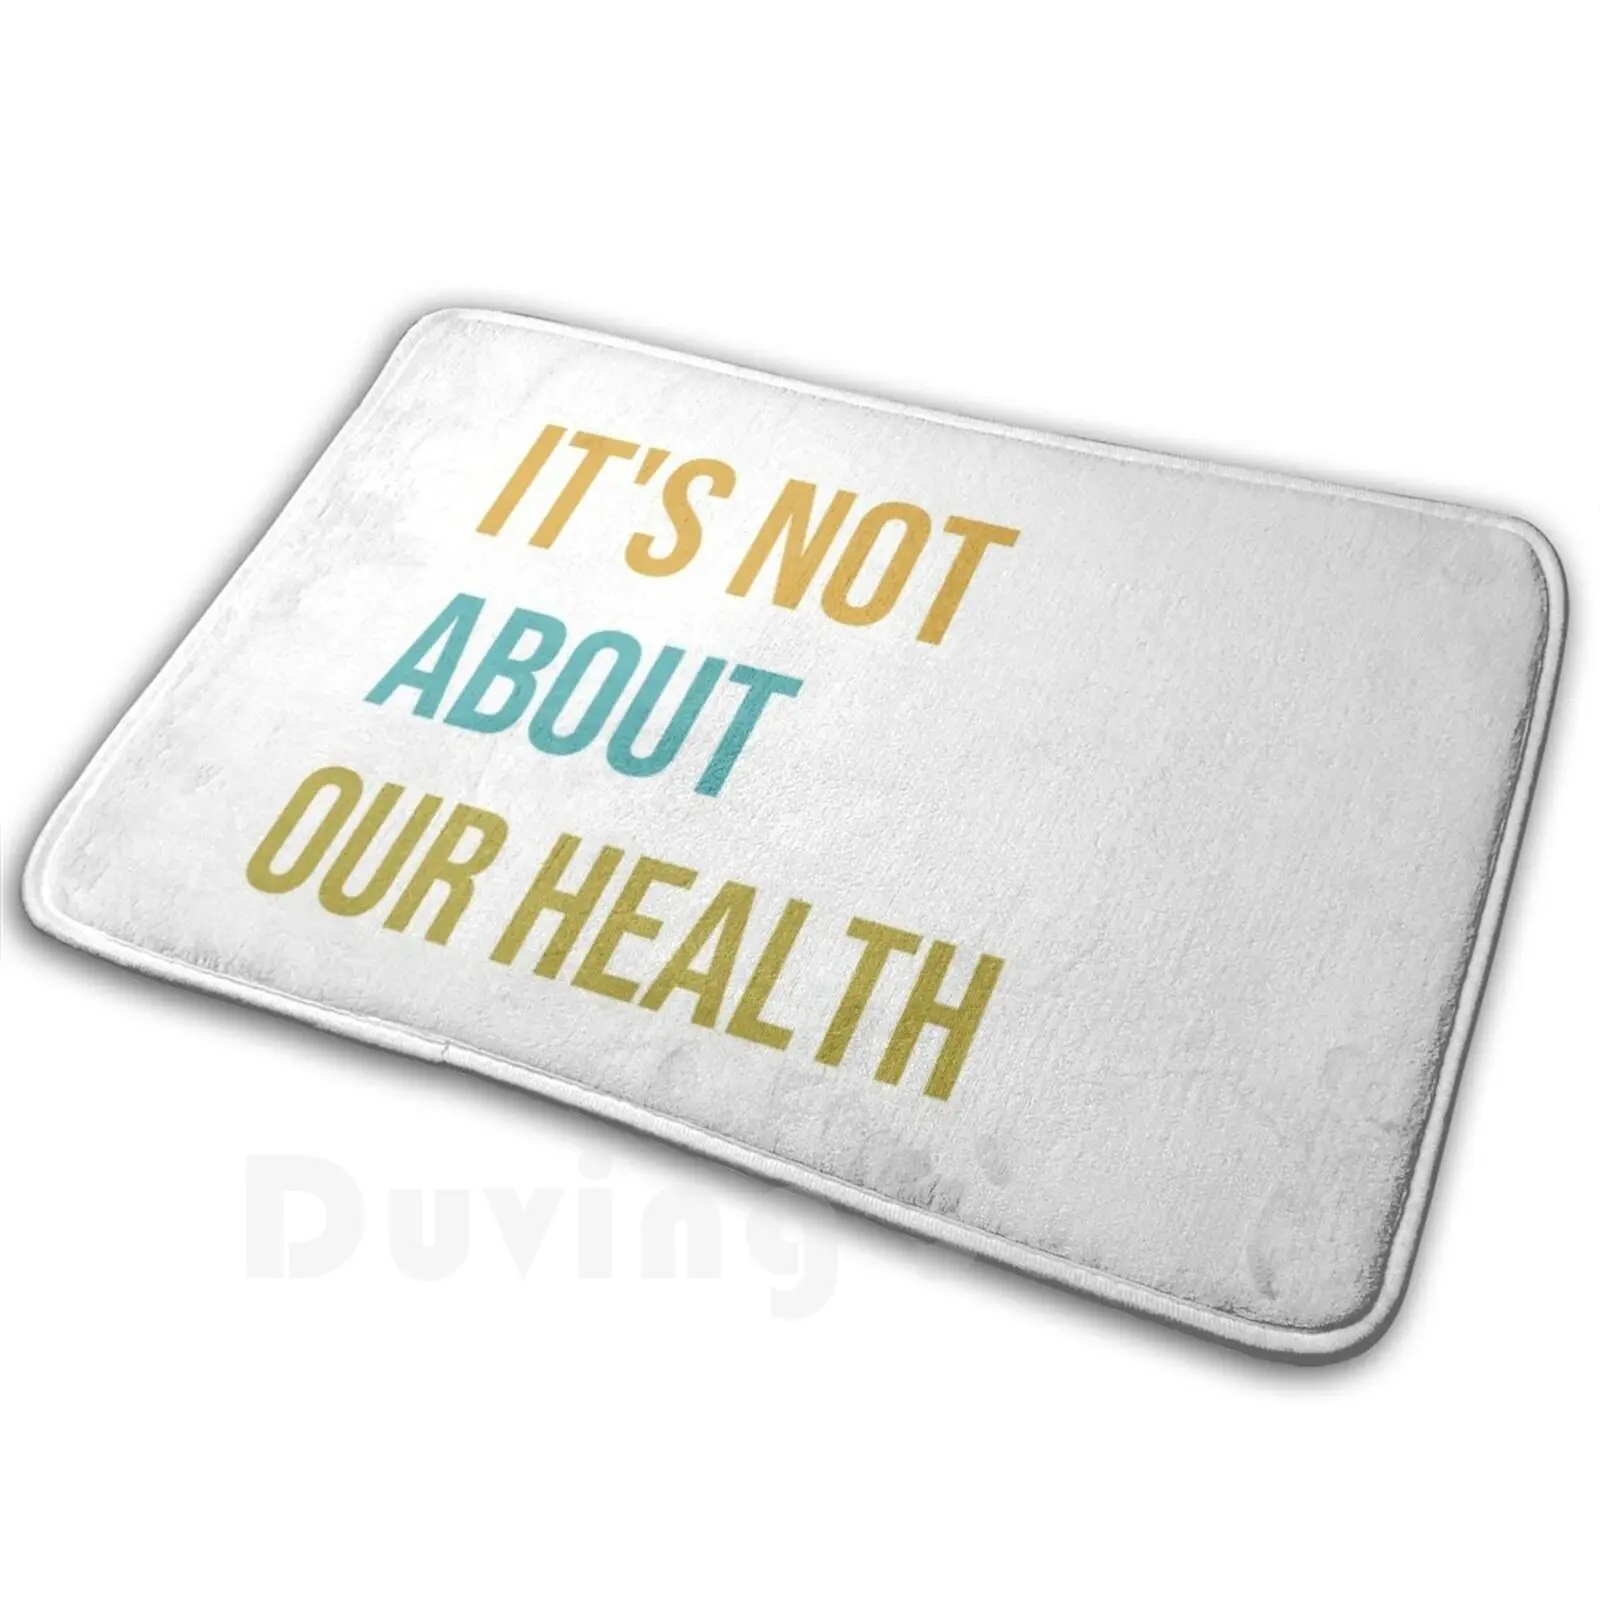 

It's Not About Our Health Carpet Mat Rug Cushion Soft Non-Slip Health Its Not About Our Health